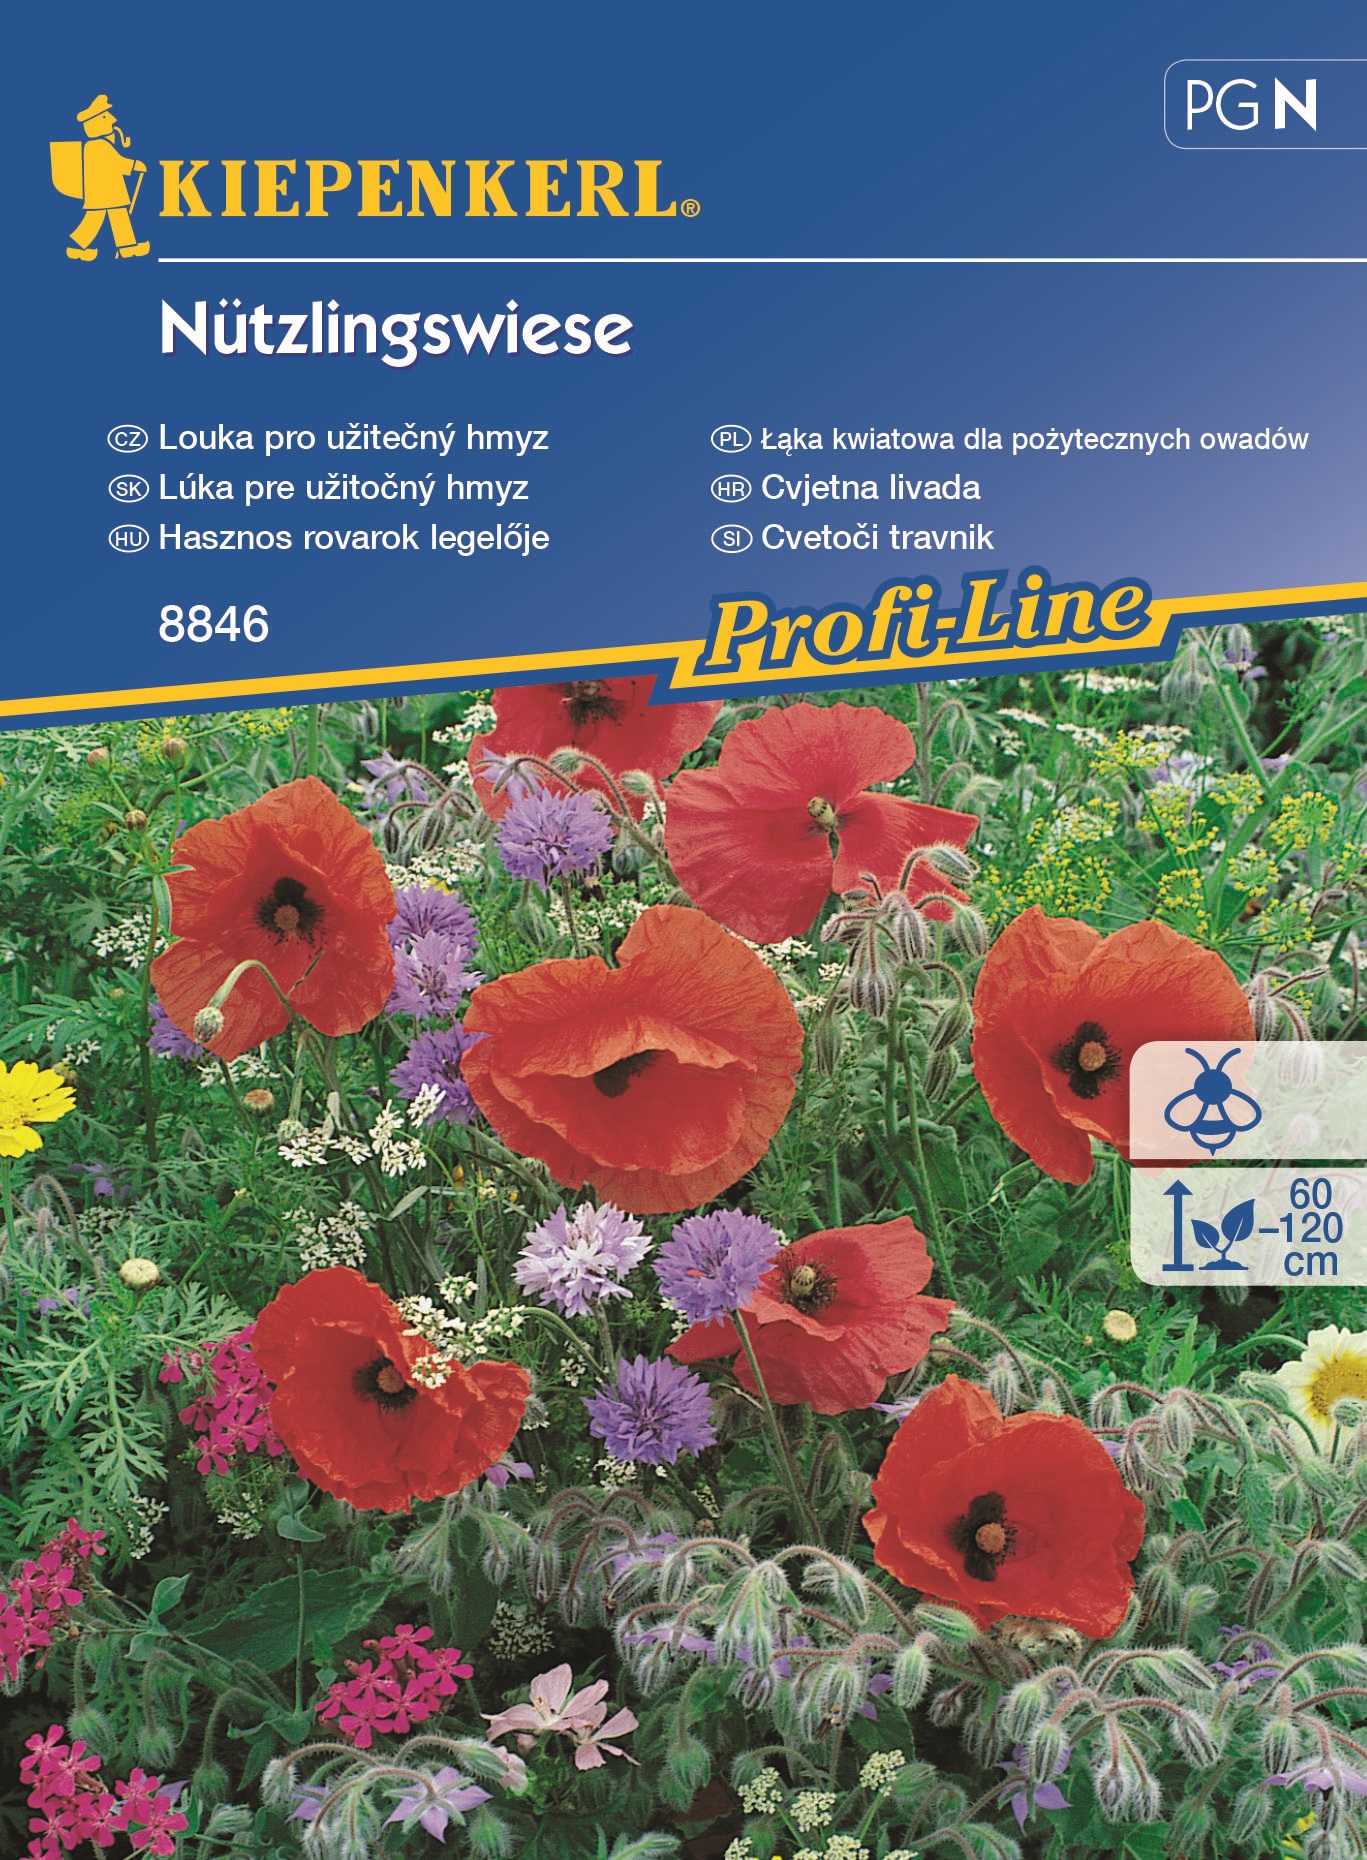 Useful insect pasture Kiepenkerl 3-4 m2